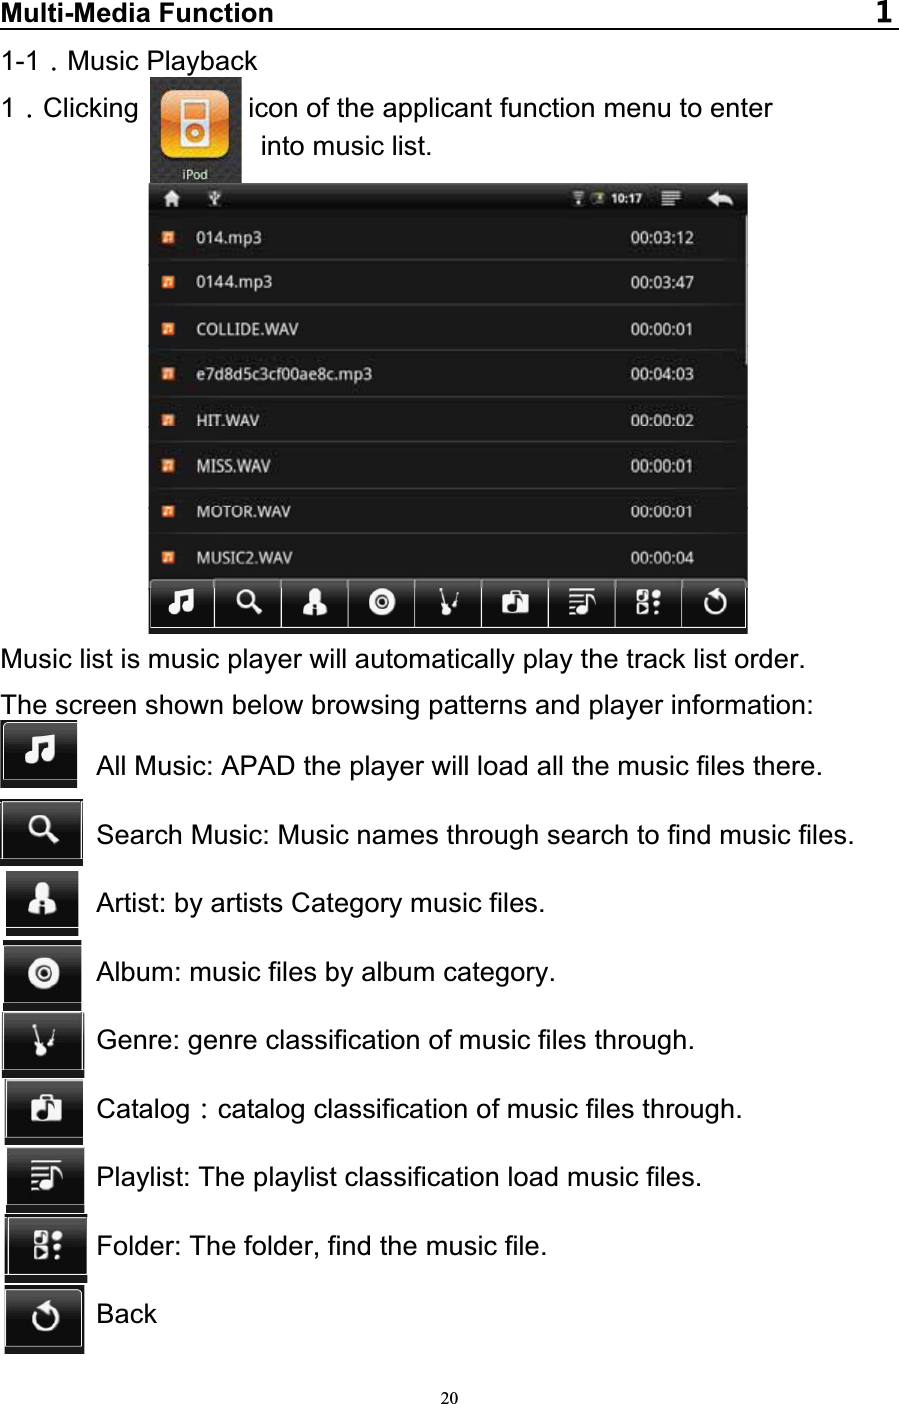   20Multi-Media Function1-1 Music Playback 1Clicking        icon of the applicant function menu to enter  into music list.             Music list is music player will automatically play the track list order. The screen shown below browsing patterns and player information: All Music: APAD the player will load all the music files there. Search Music: Music names through search to find music files. Artist: by artists Category music files. Album: music files by album category. Genre: genre classification of music files through. Catalog catalog classification of music files through. Playlist: The playlist classification load music files.        Folder: The folder, find the music file.        Back 